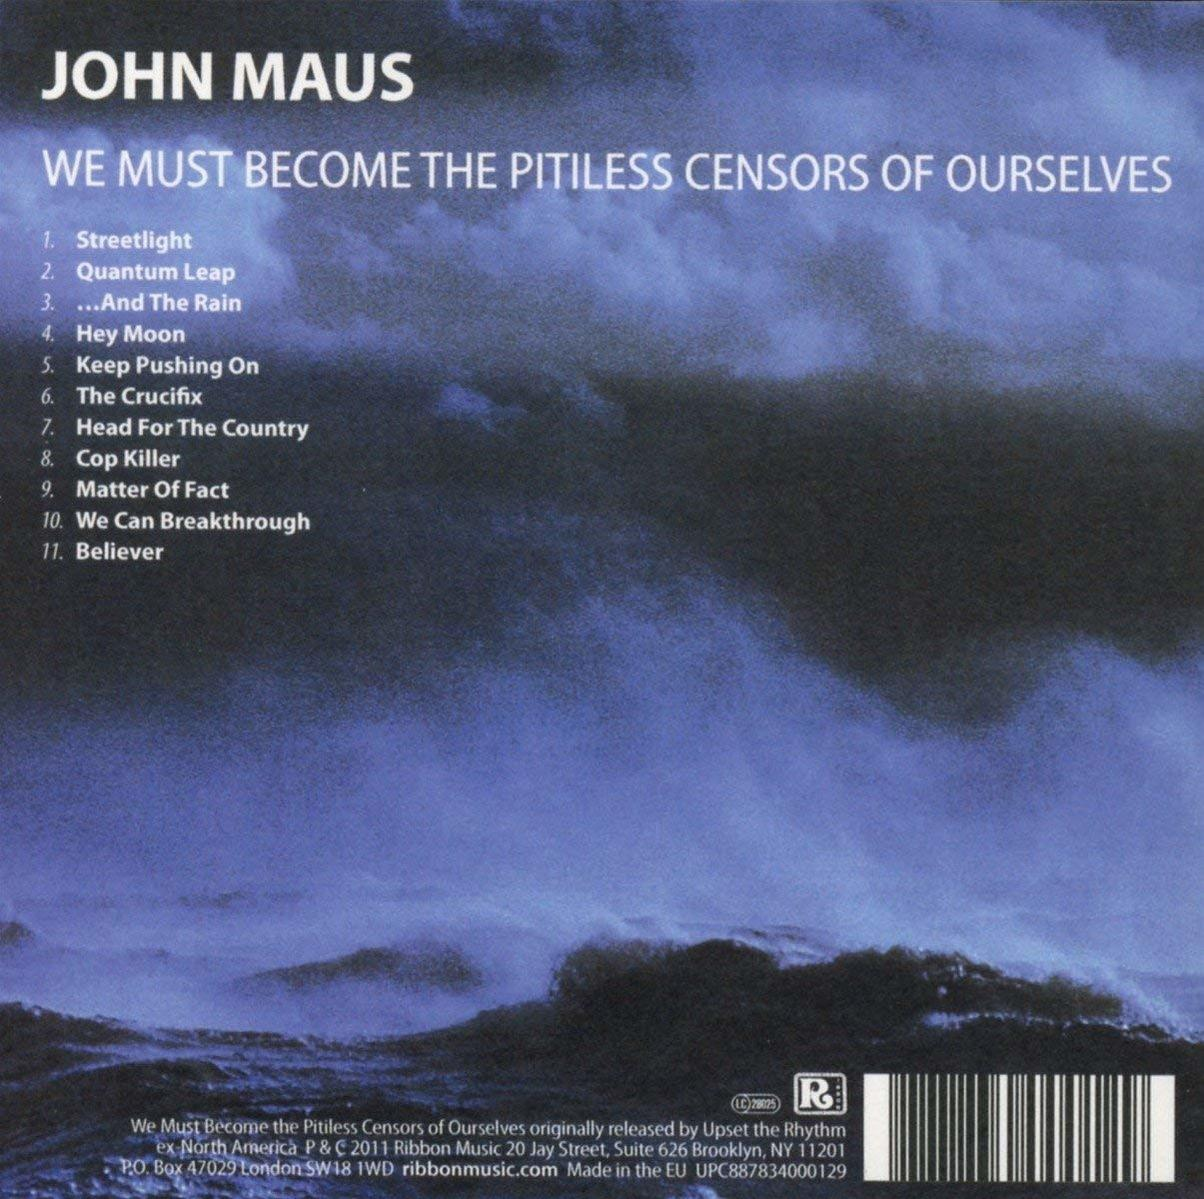 - Pitiless John Maus - Censors Become Must Ourselves (CD) Of We The